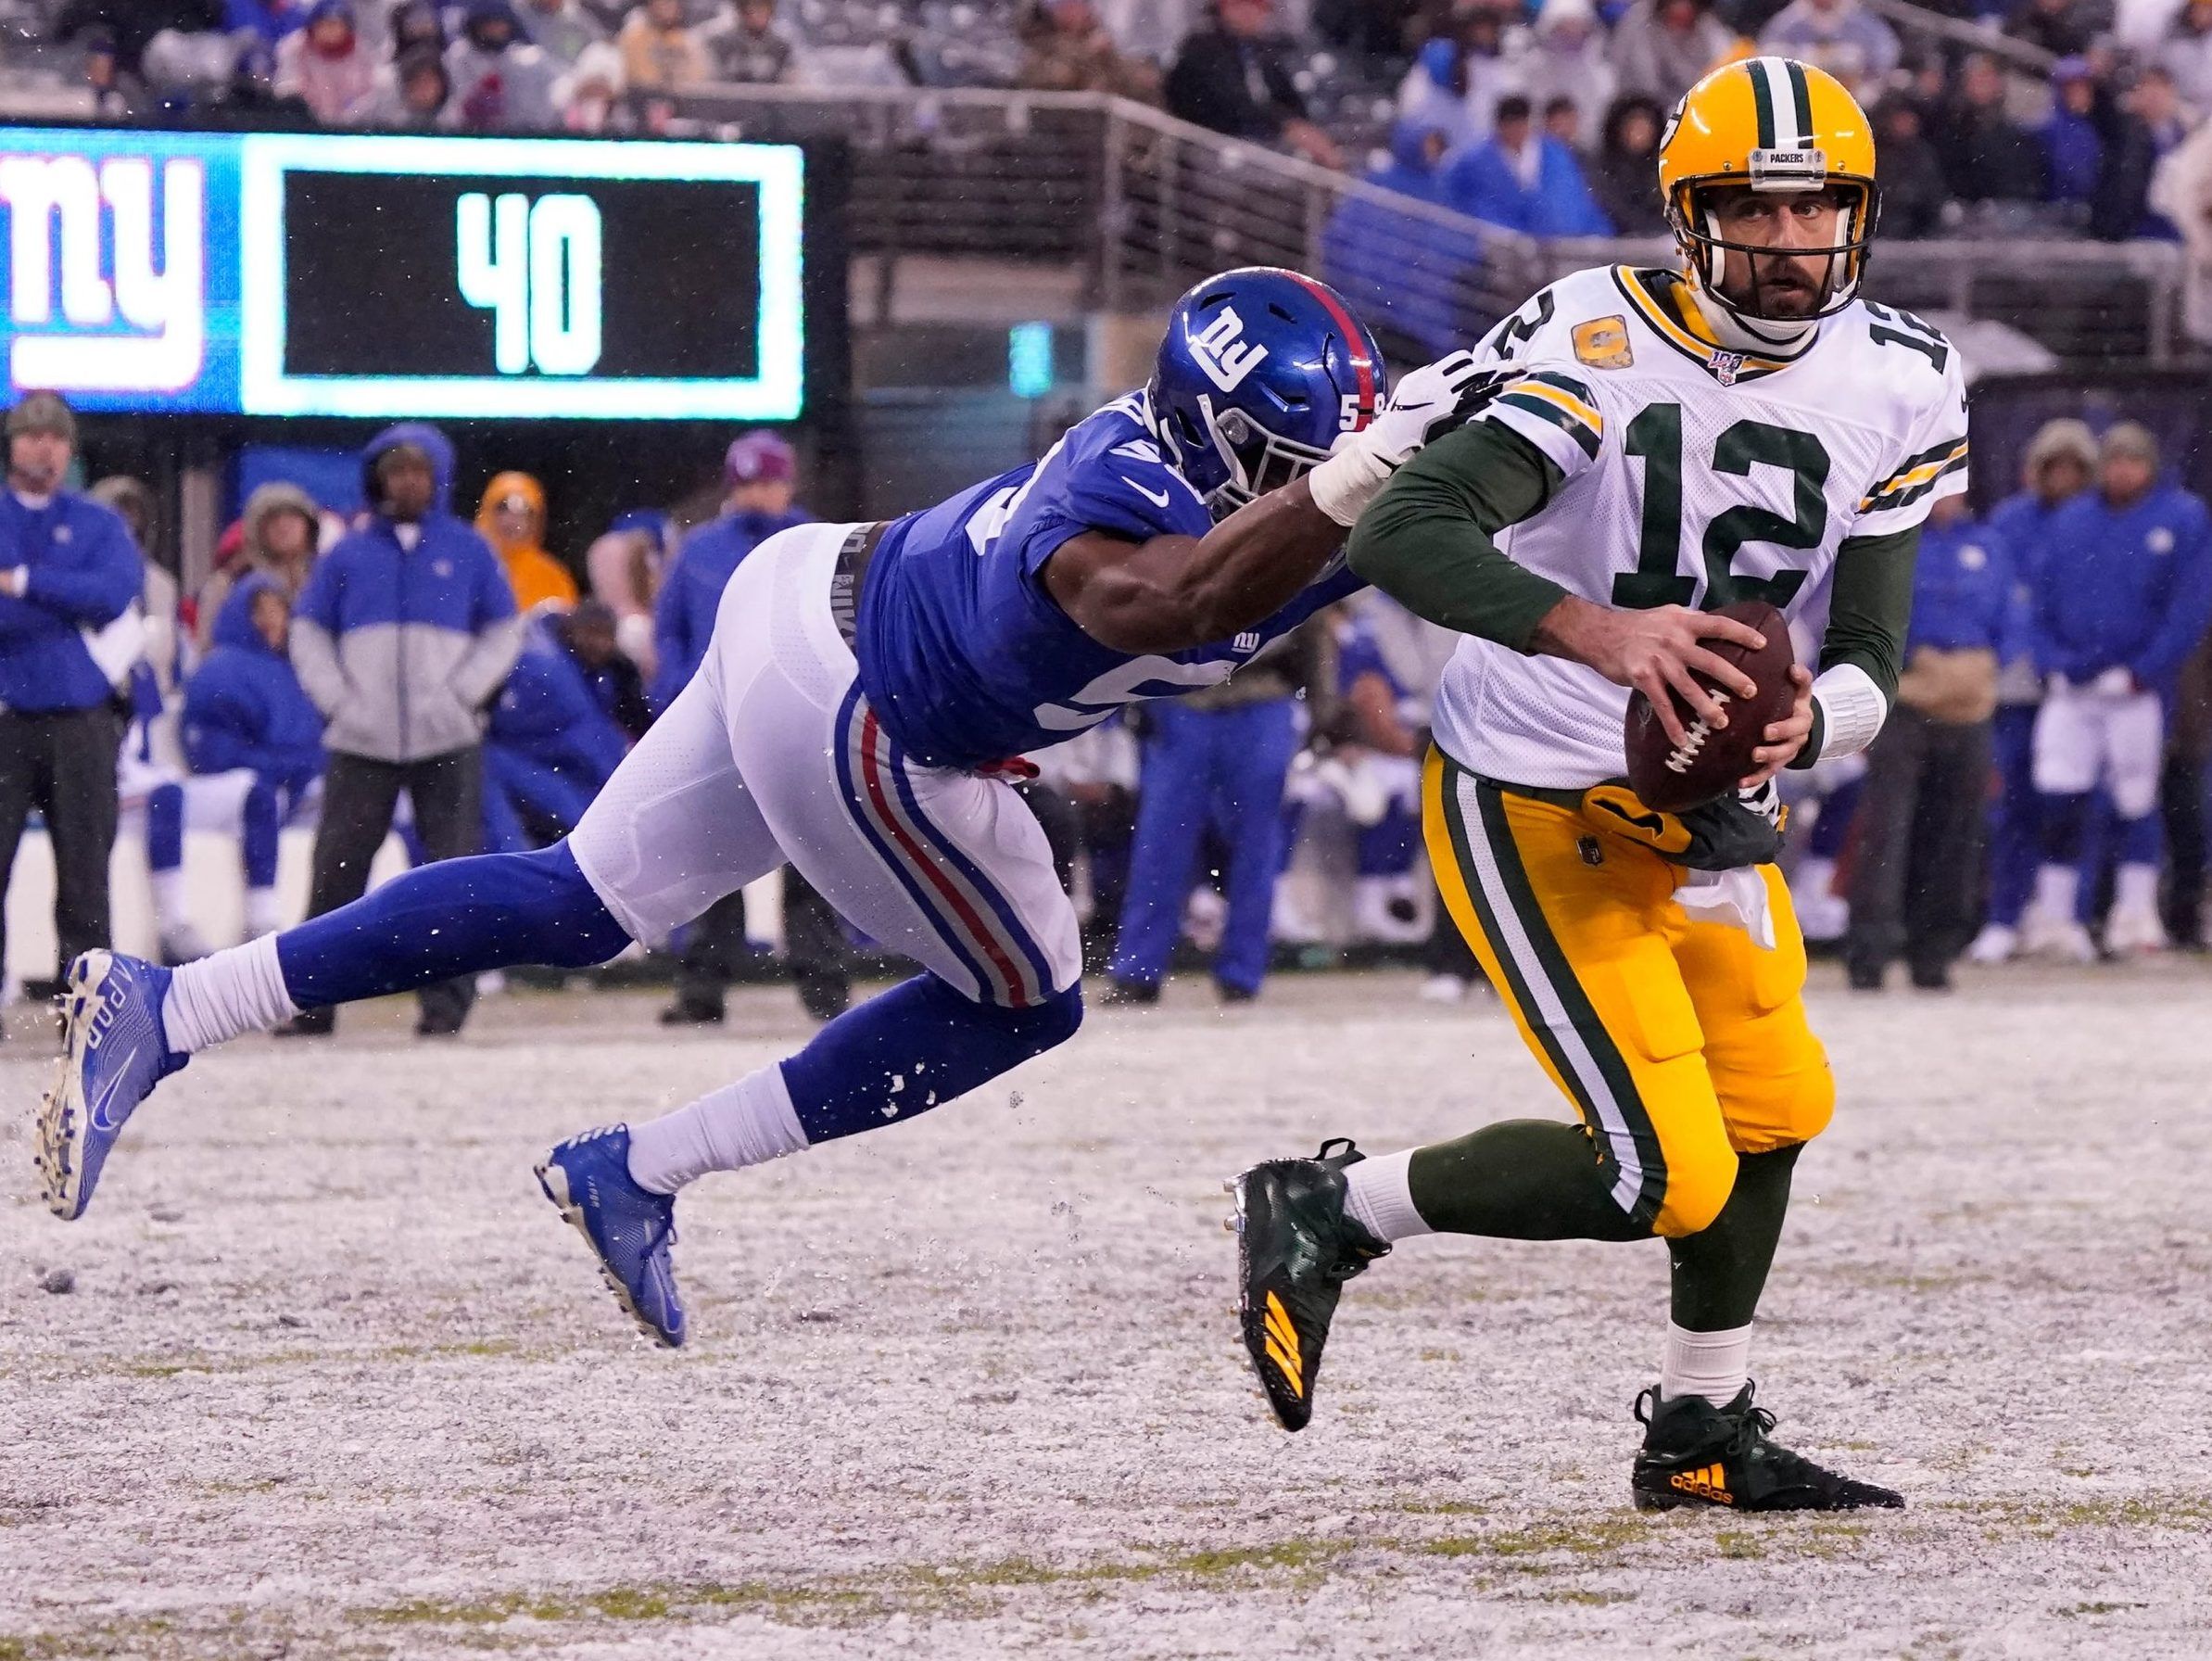 BETTING PREVIEW AND PICKS: Green Bay Packers vs. New York Giants